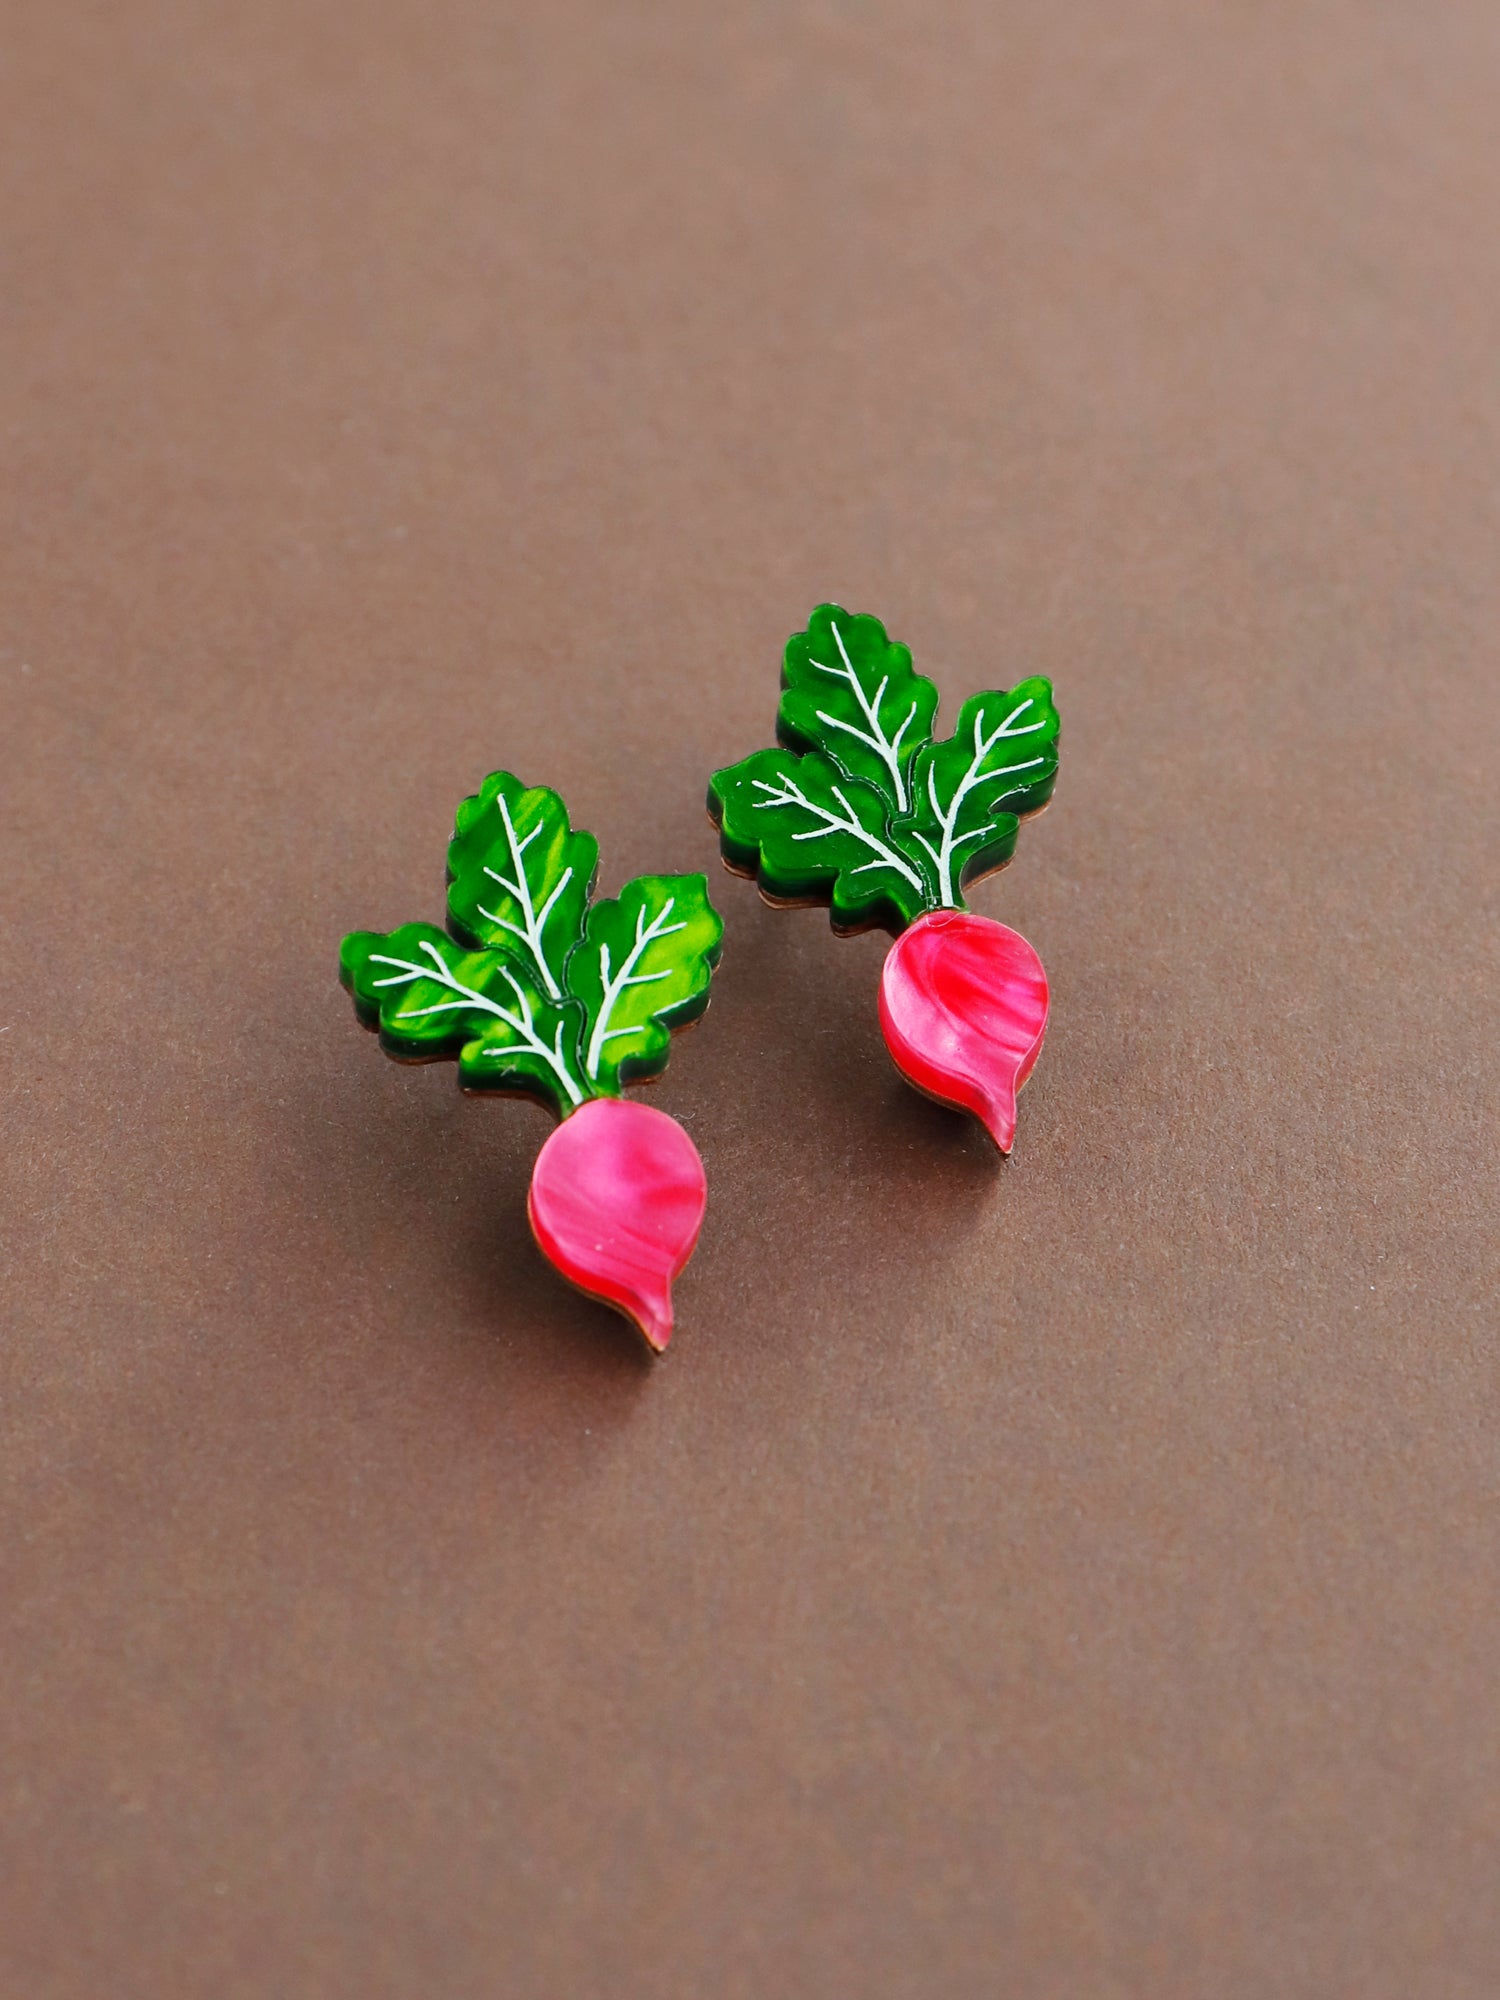 Pink and green acrylic mini radish stud earrings with silver posts. Handmade in London by Wolf & Moon.